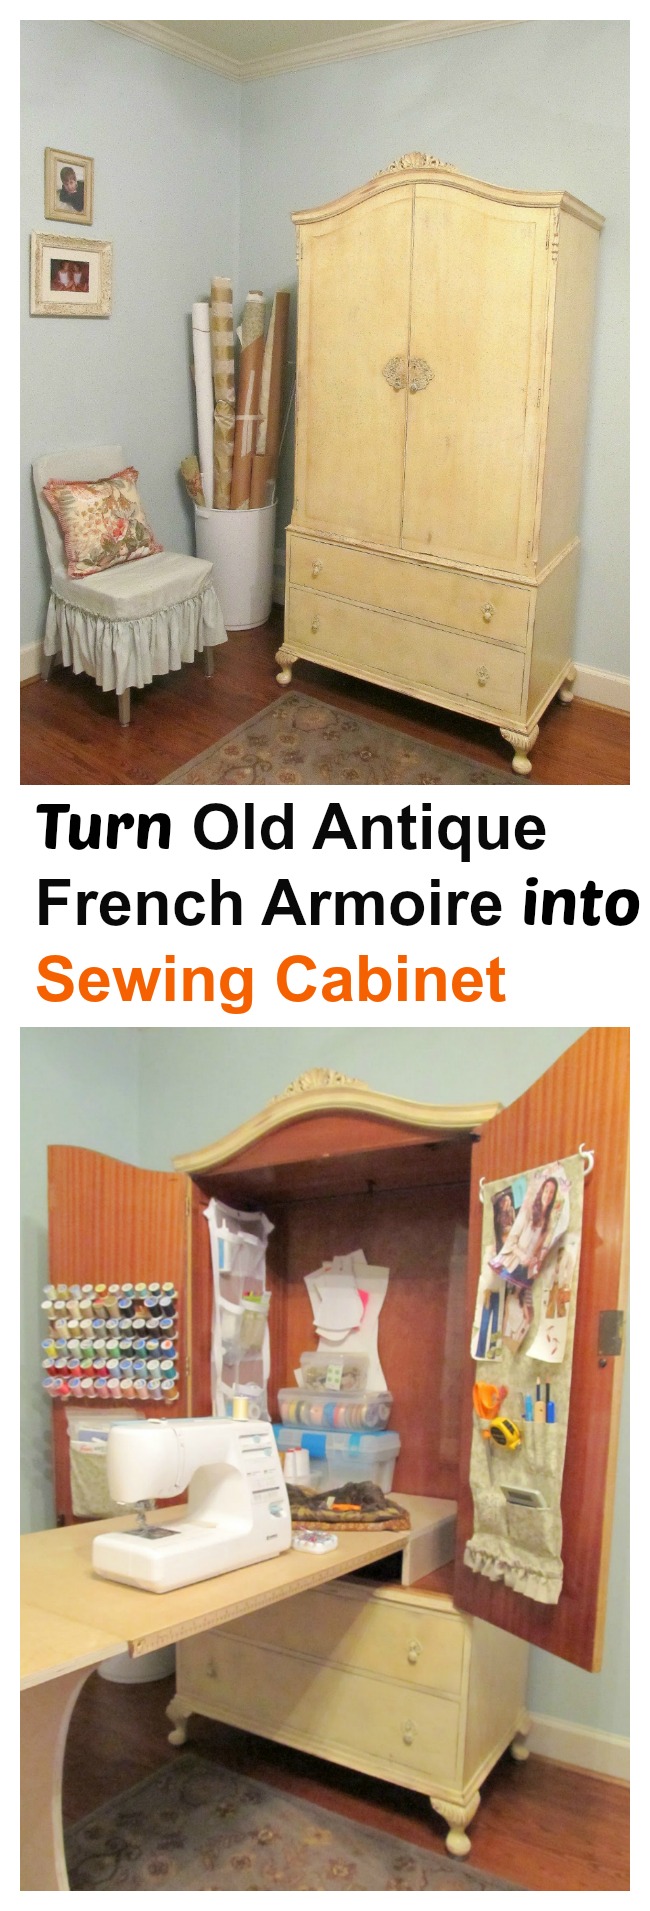 Turn Old Antique French Armoire into a Sewing Cabinet